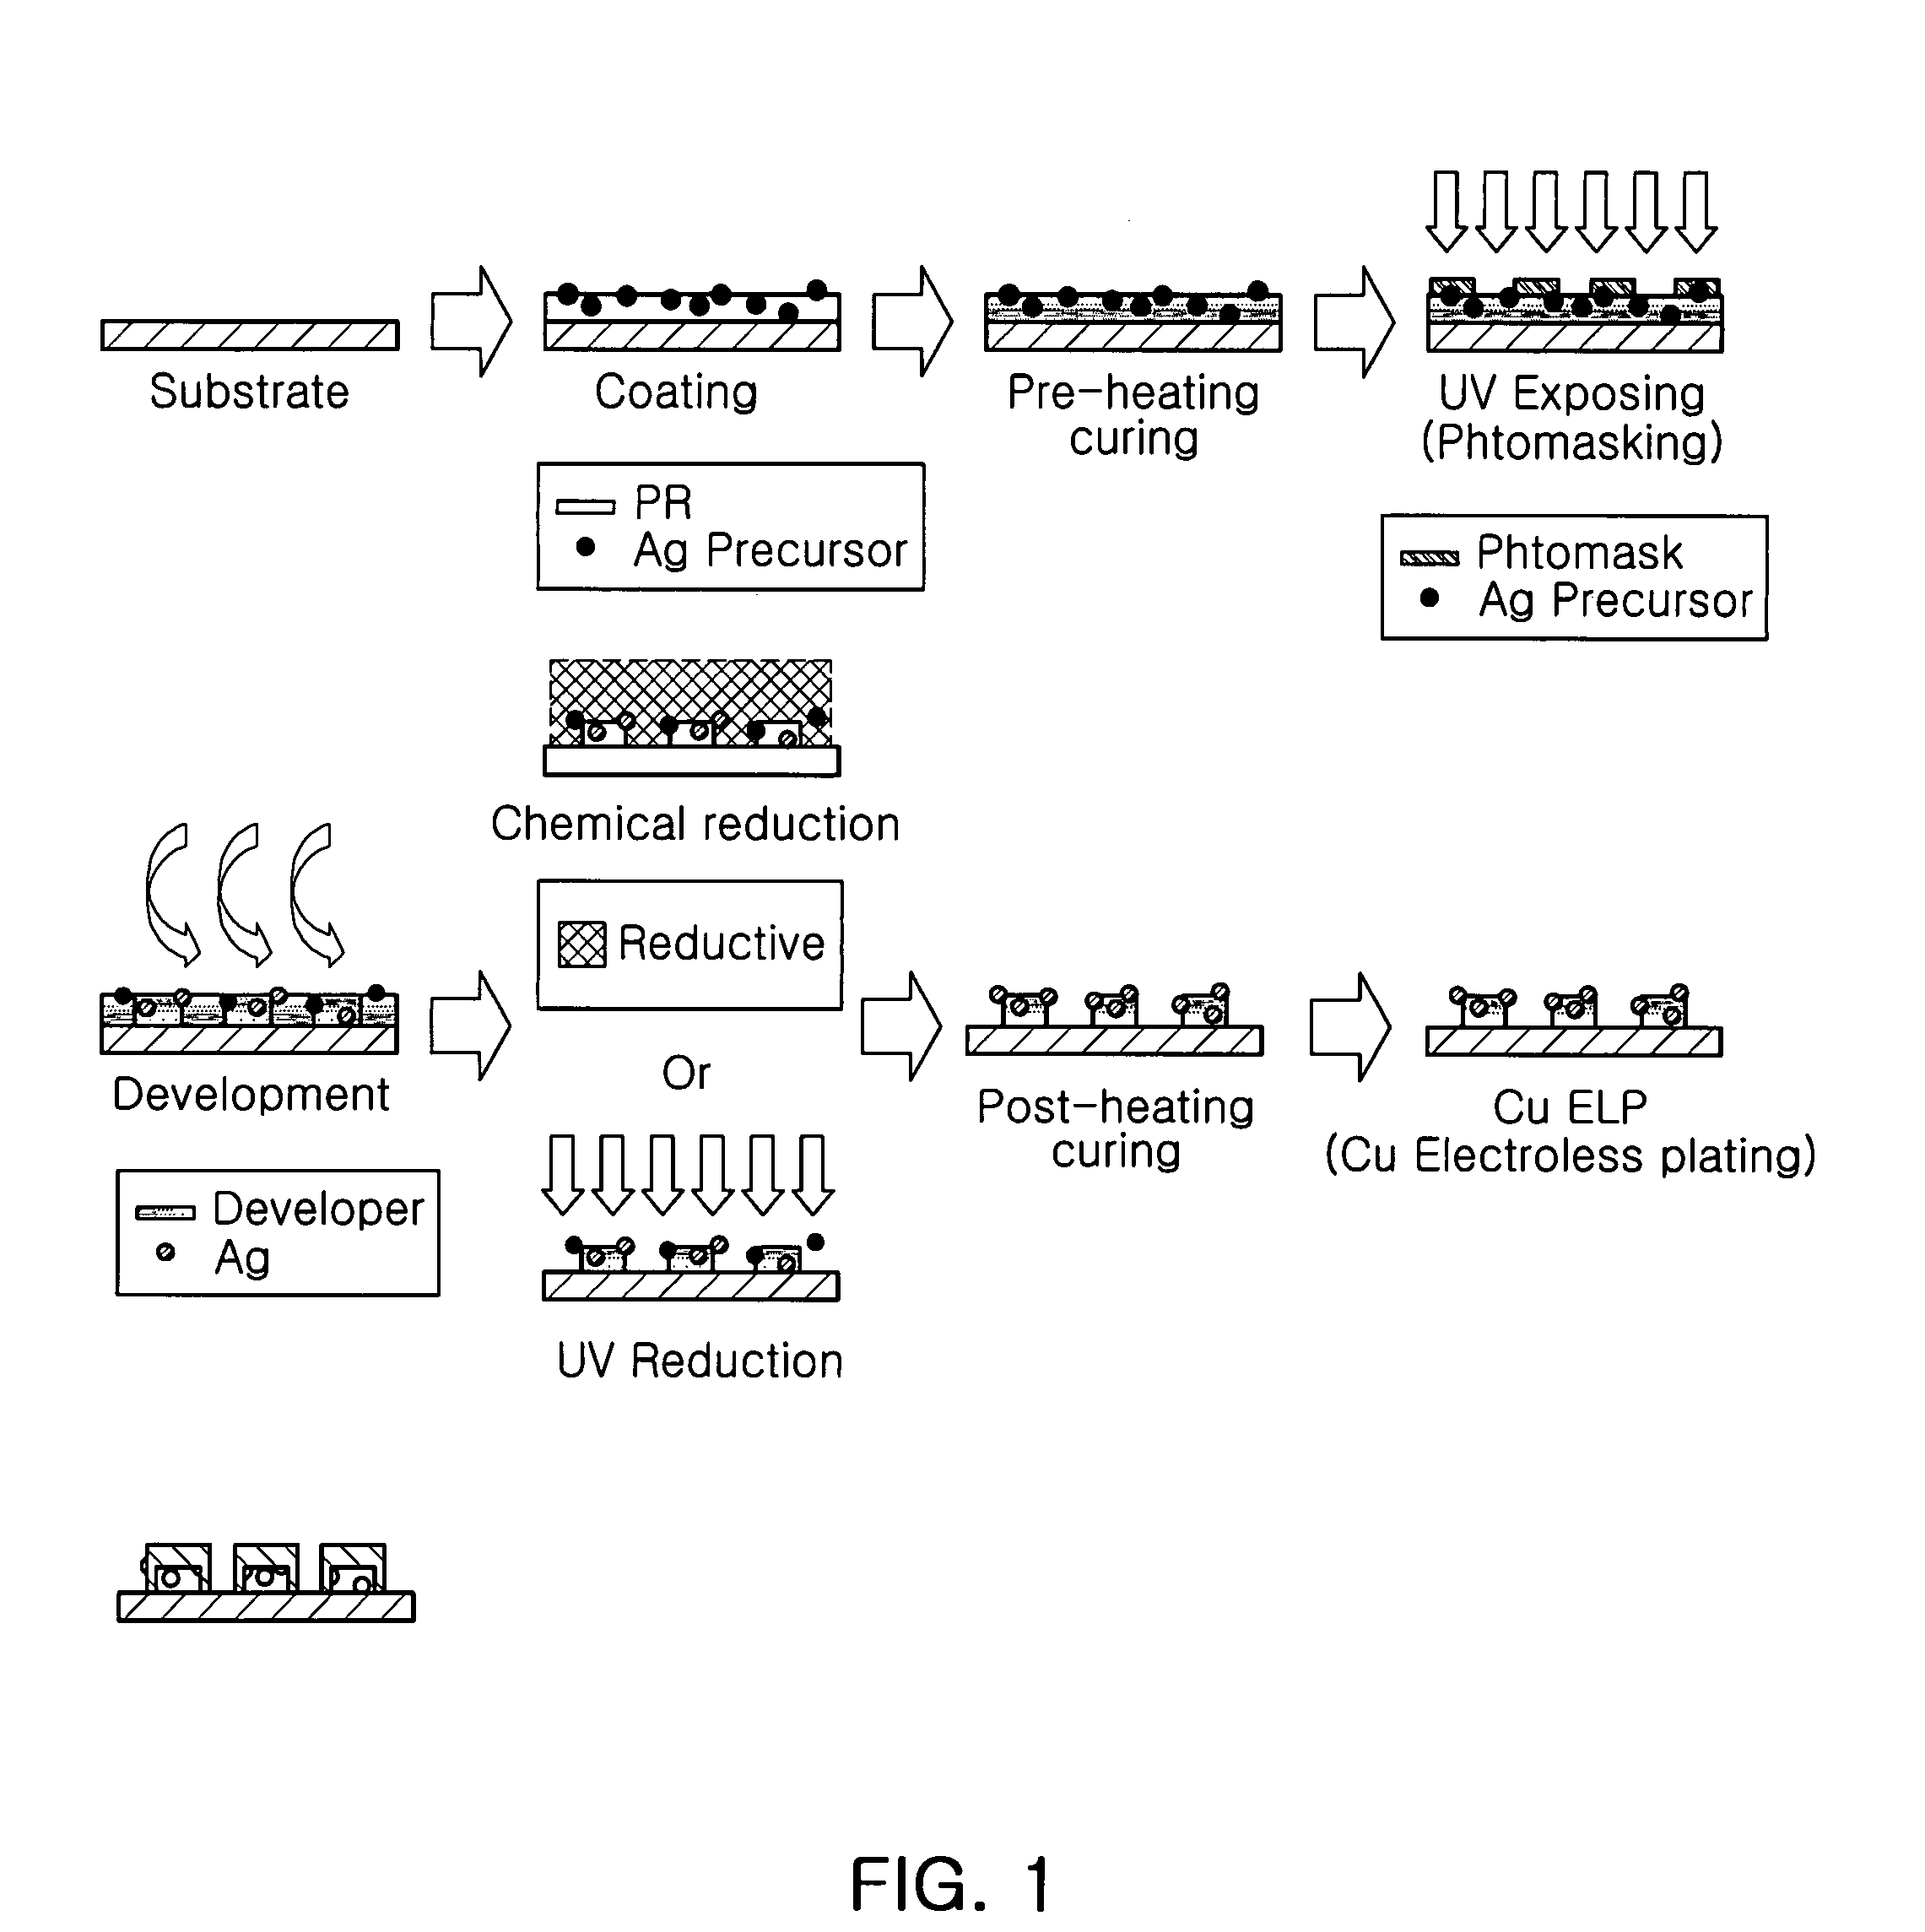 Resin composition comprising catalyst precursor for electroless plating to form electromagnetic wave shielding layer, methods for forming metal patterns using the resin composition and metal patterns formed by the methods